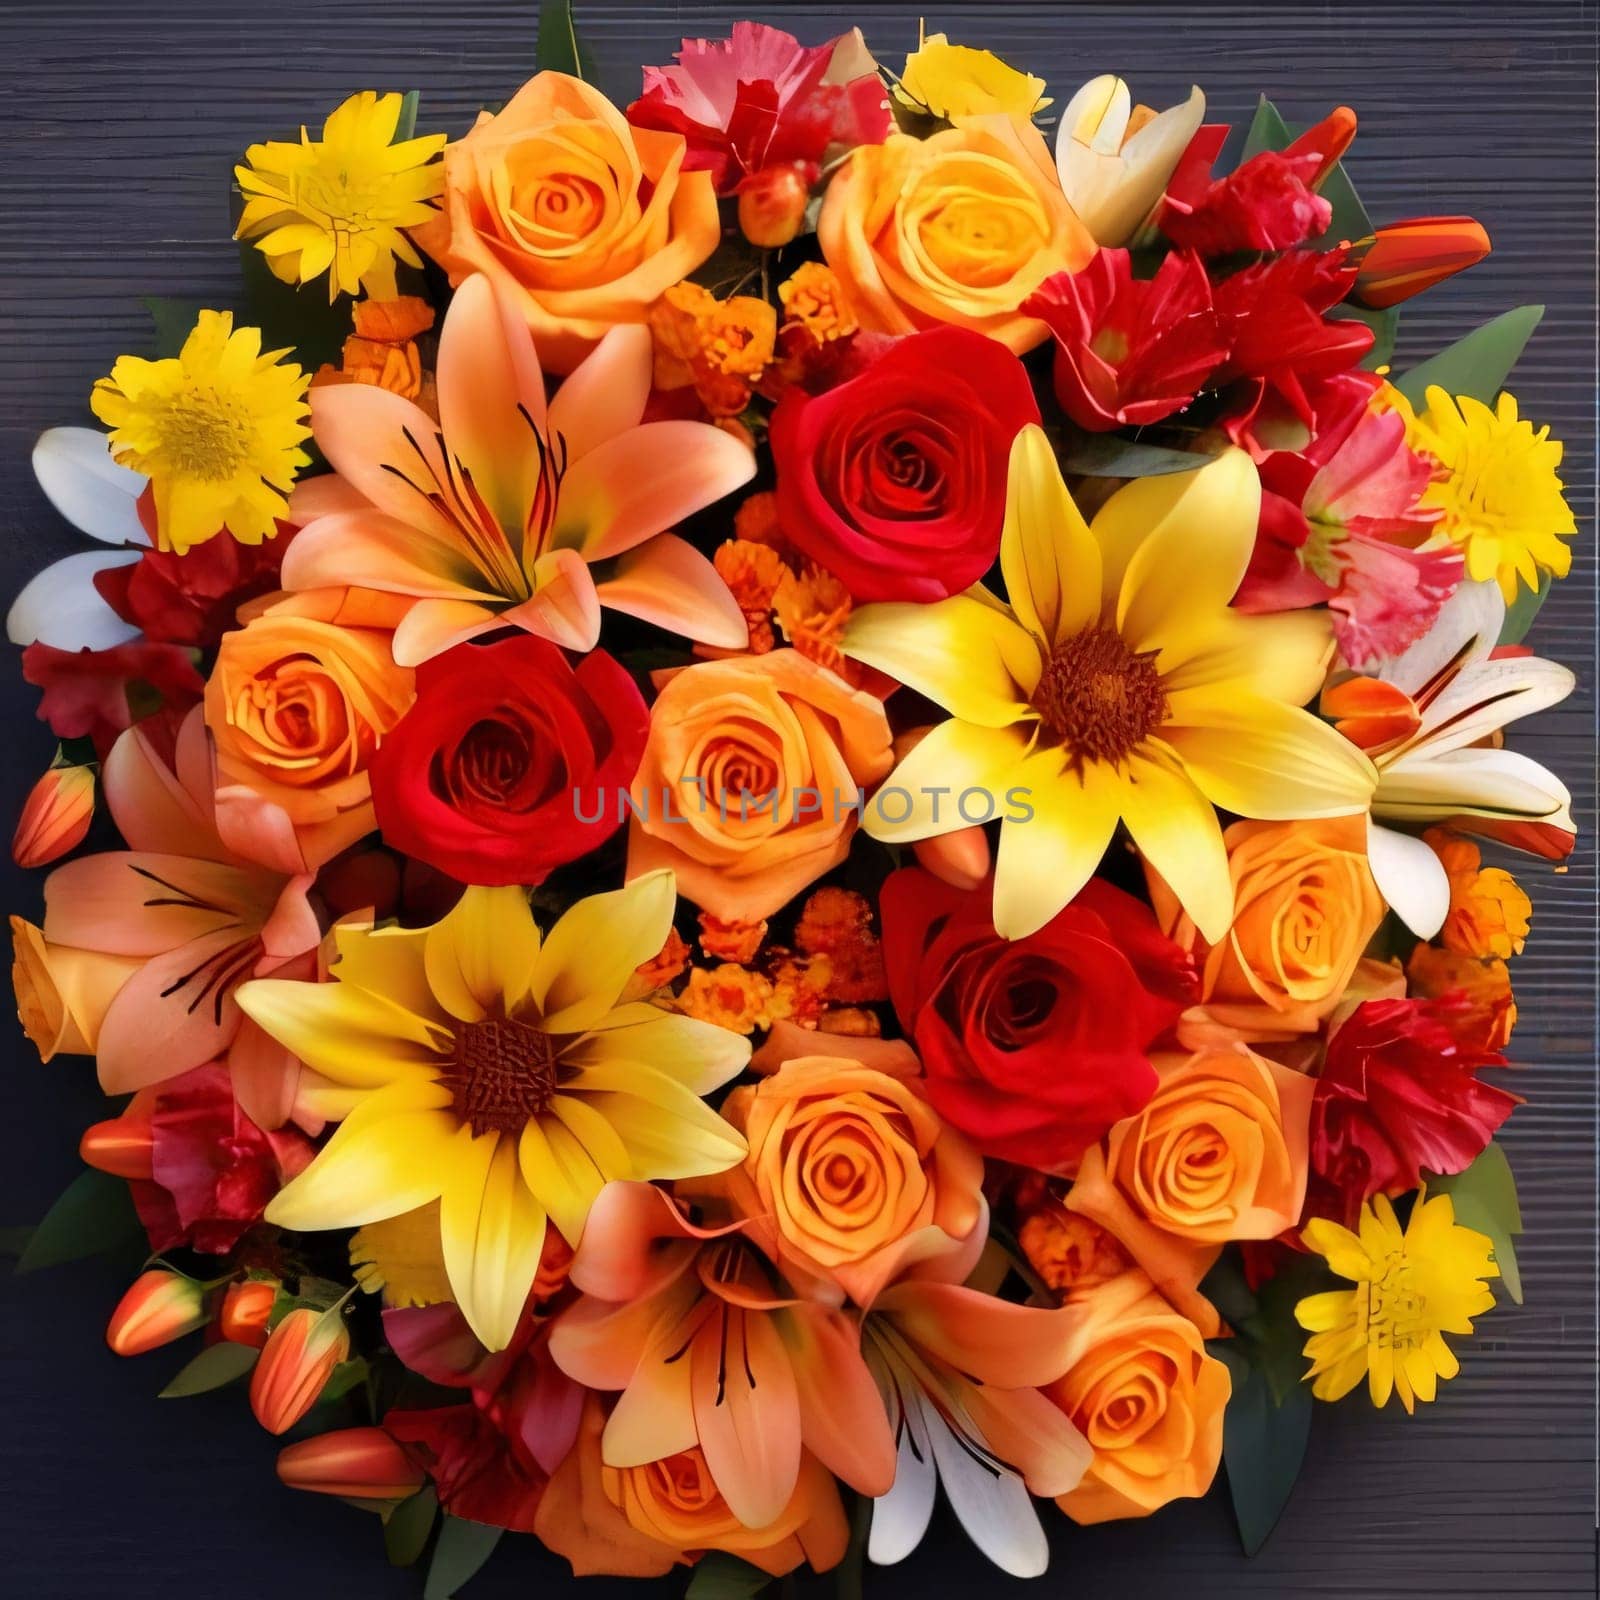 Round wreath of yellow and red flowers on a gray background. Flowering flowers, a symbol of spring, new life. A joyful time of nature waking up to life.